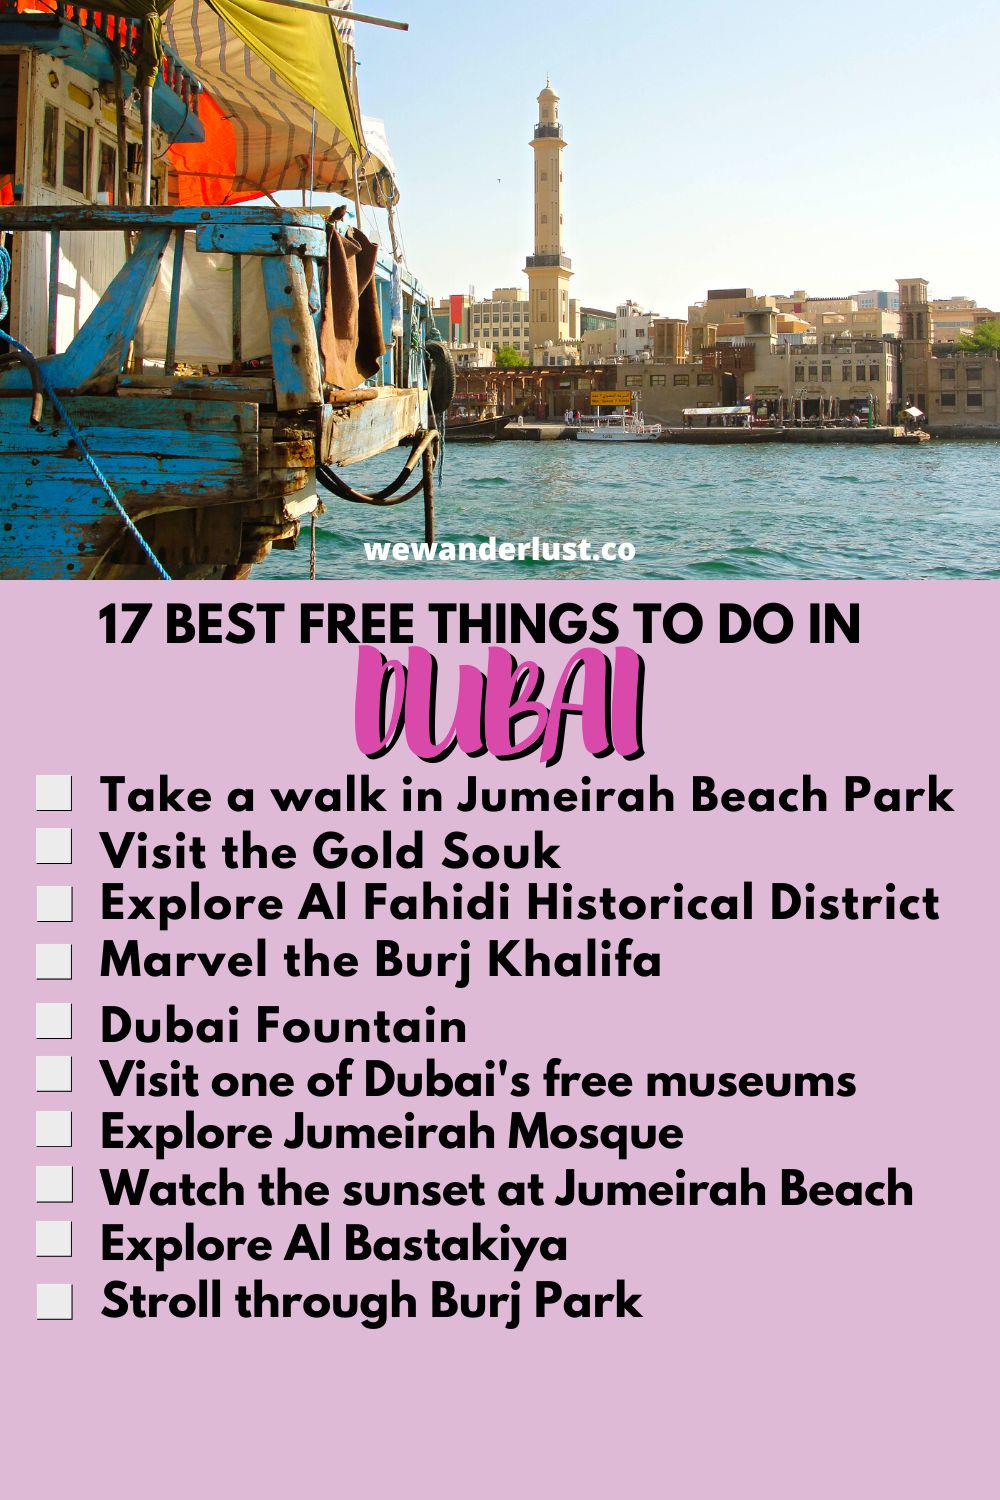 17 best free things to do in Dubai